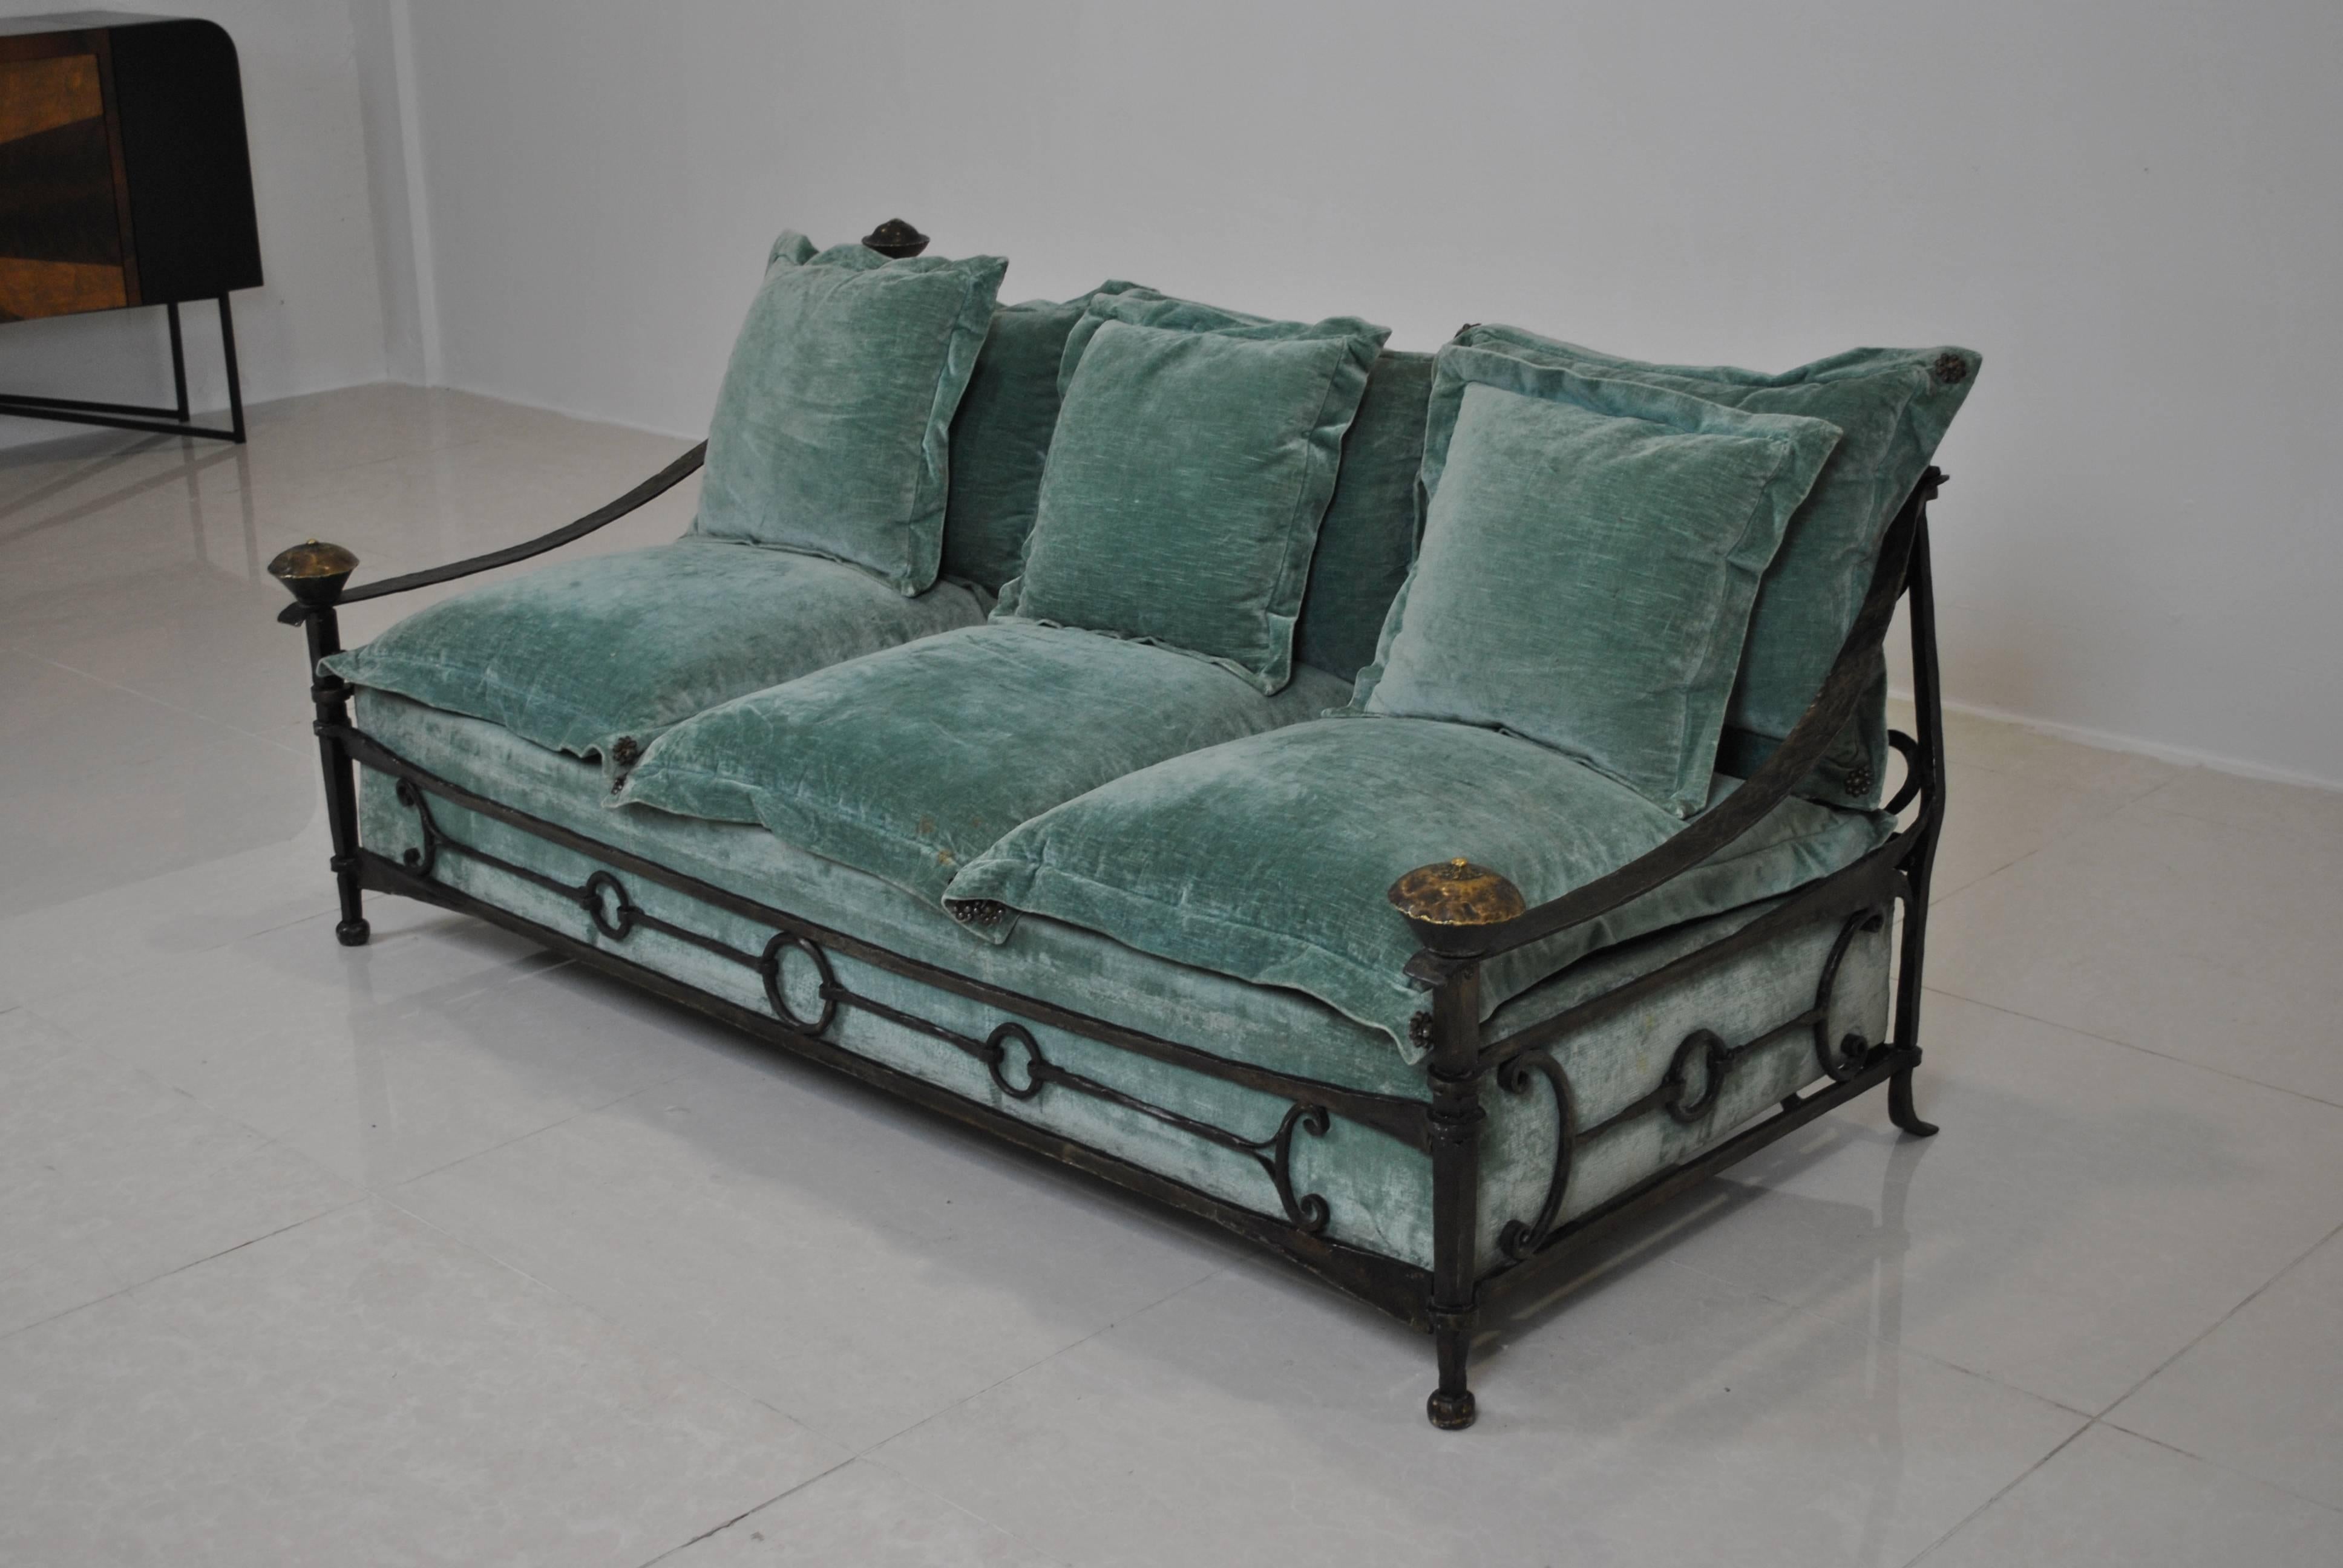 Important and rare wrought iron with bronze details sofa by Sido and François Thevenin for the Santangelo Gallery in Paris. The sofa is one of the first pieces made and is in very good condition.

The original fabric has important staining, so it